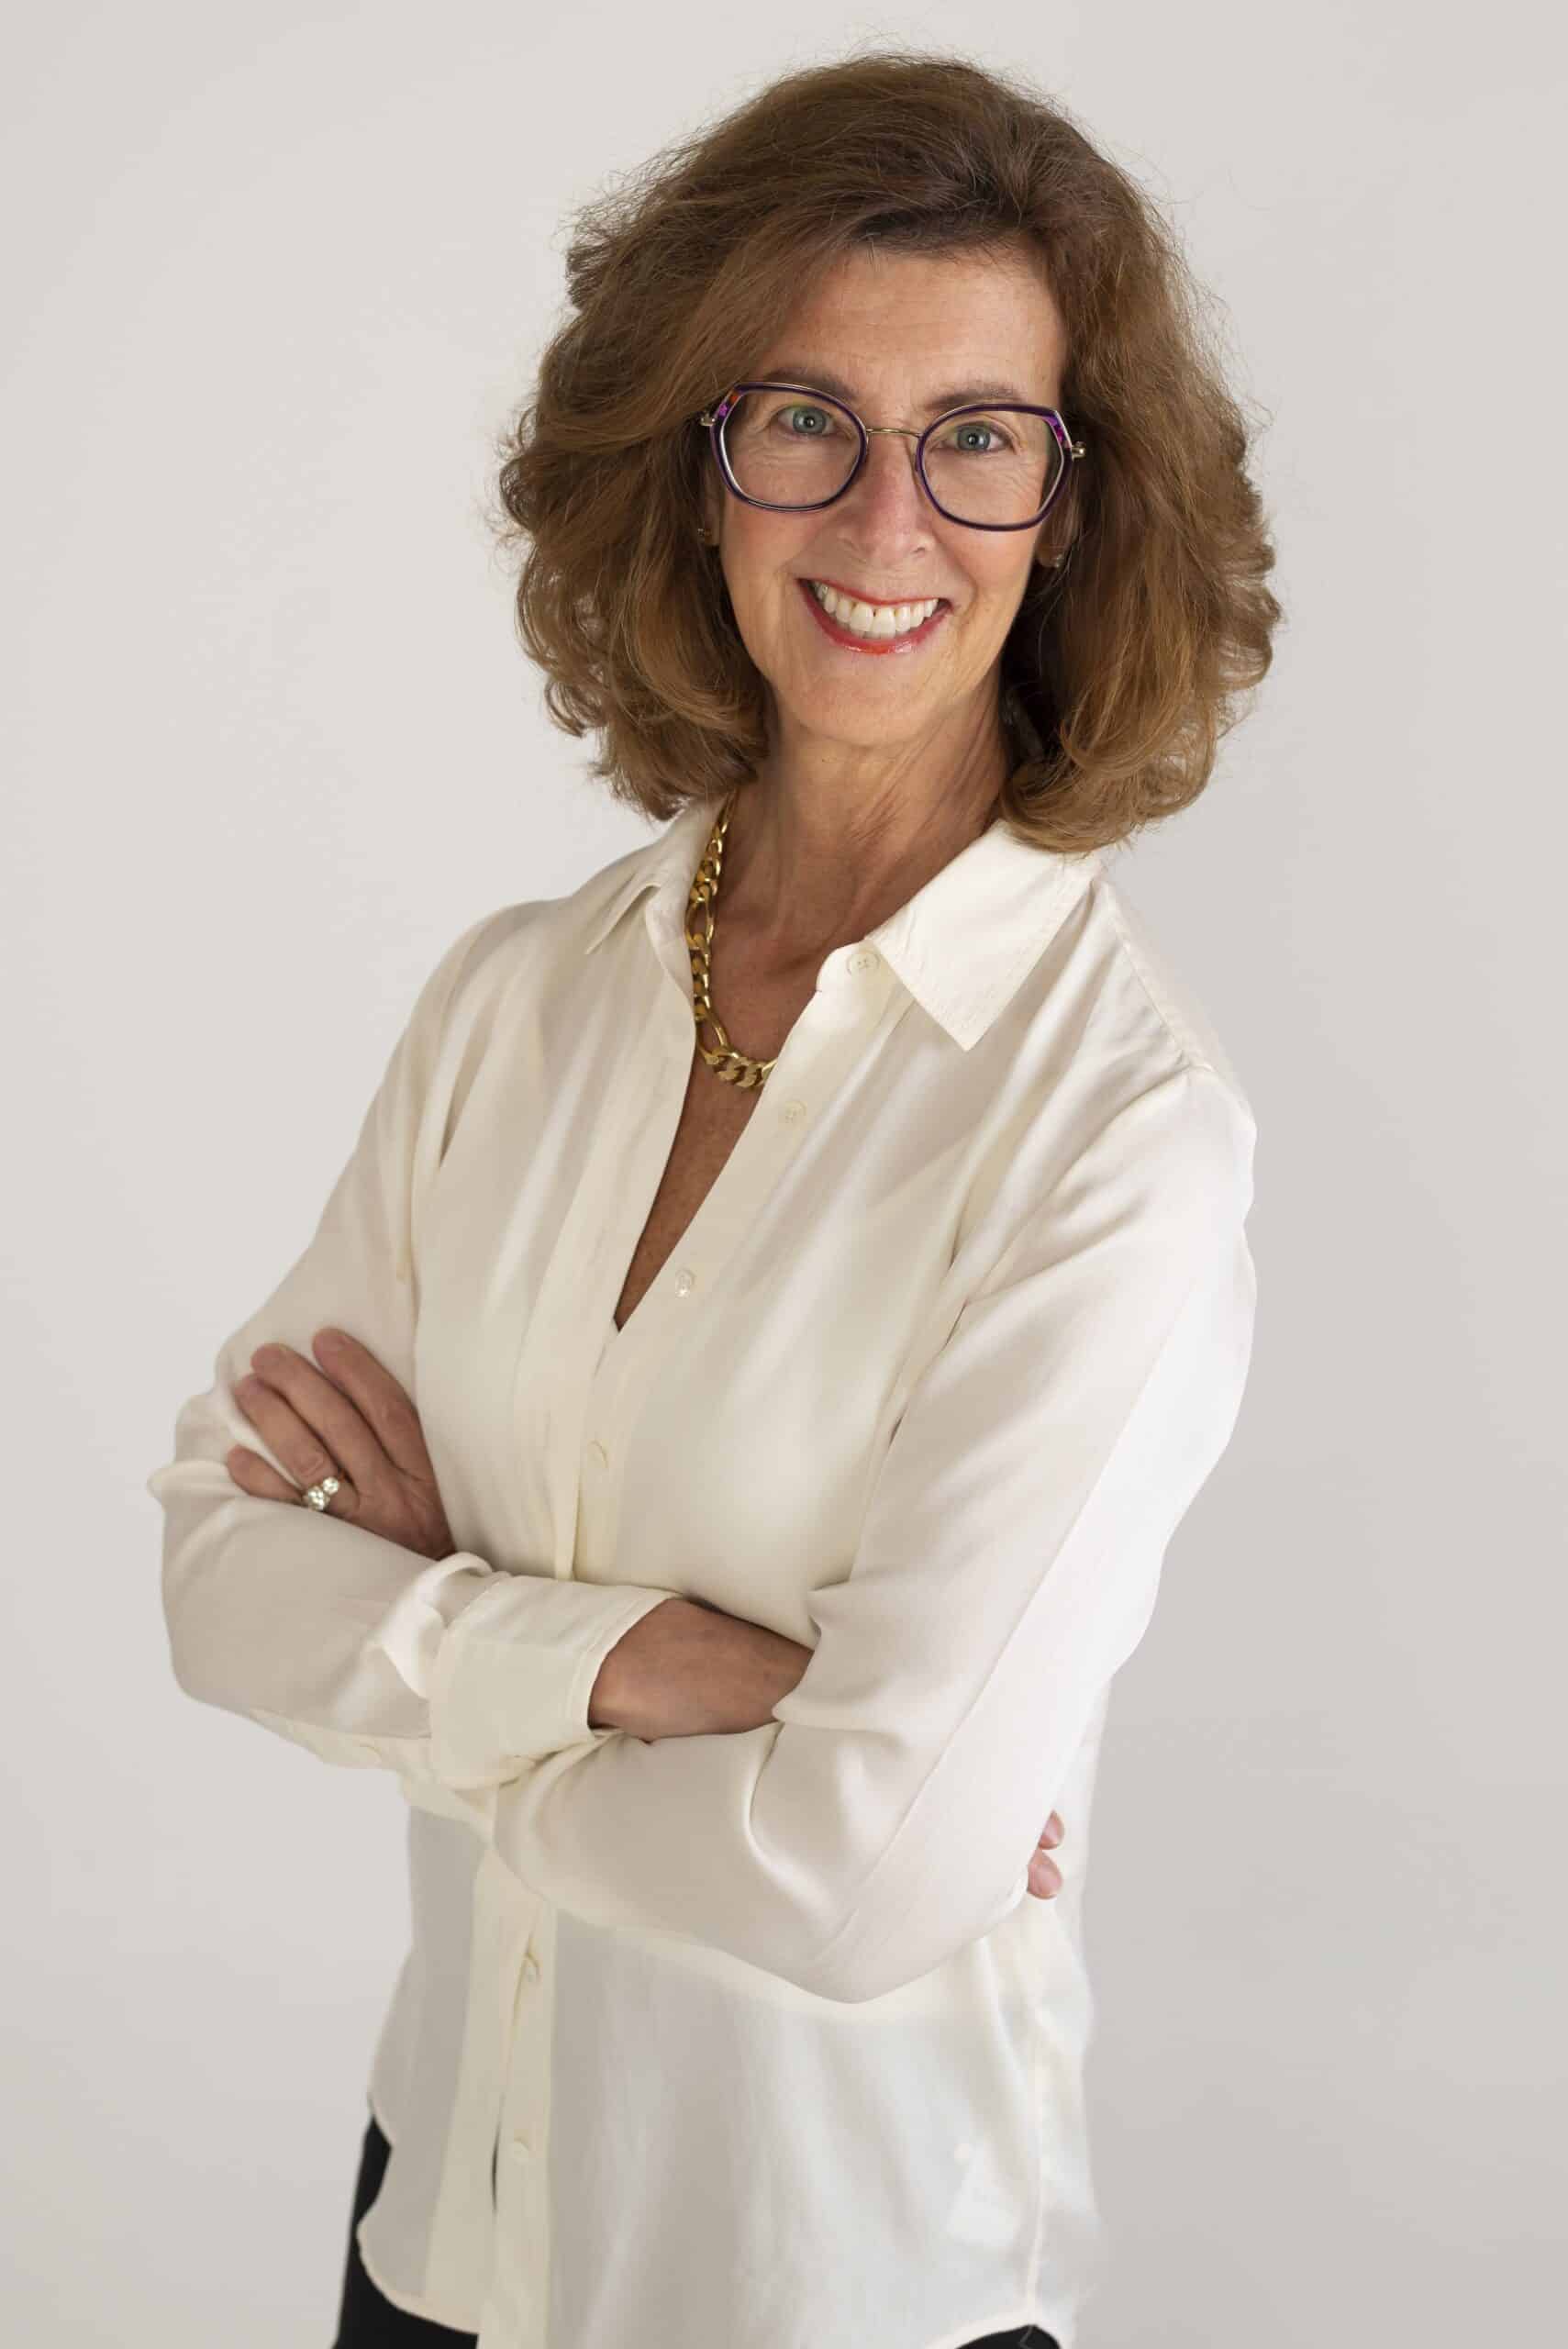 Image of Nancy Clairmont Carr standing with arms crossed in a white button down shirt.